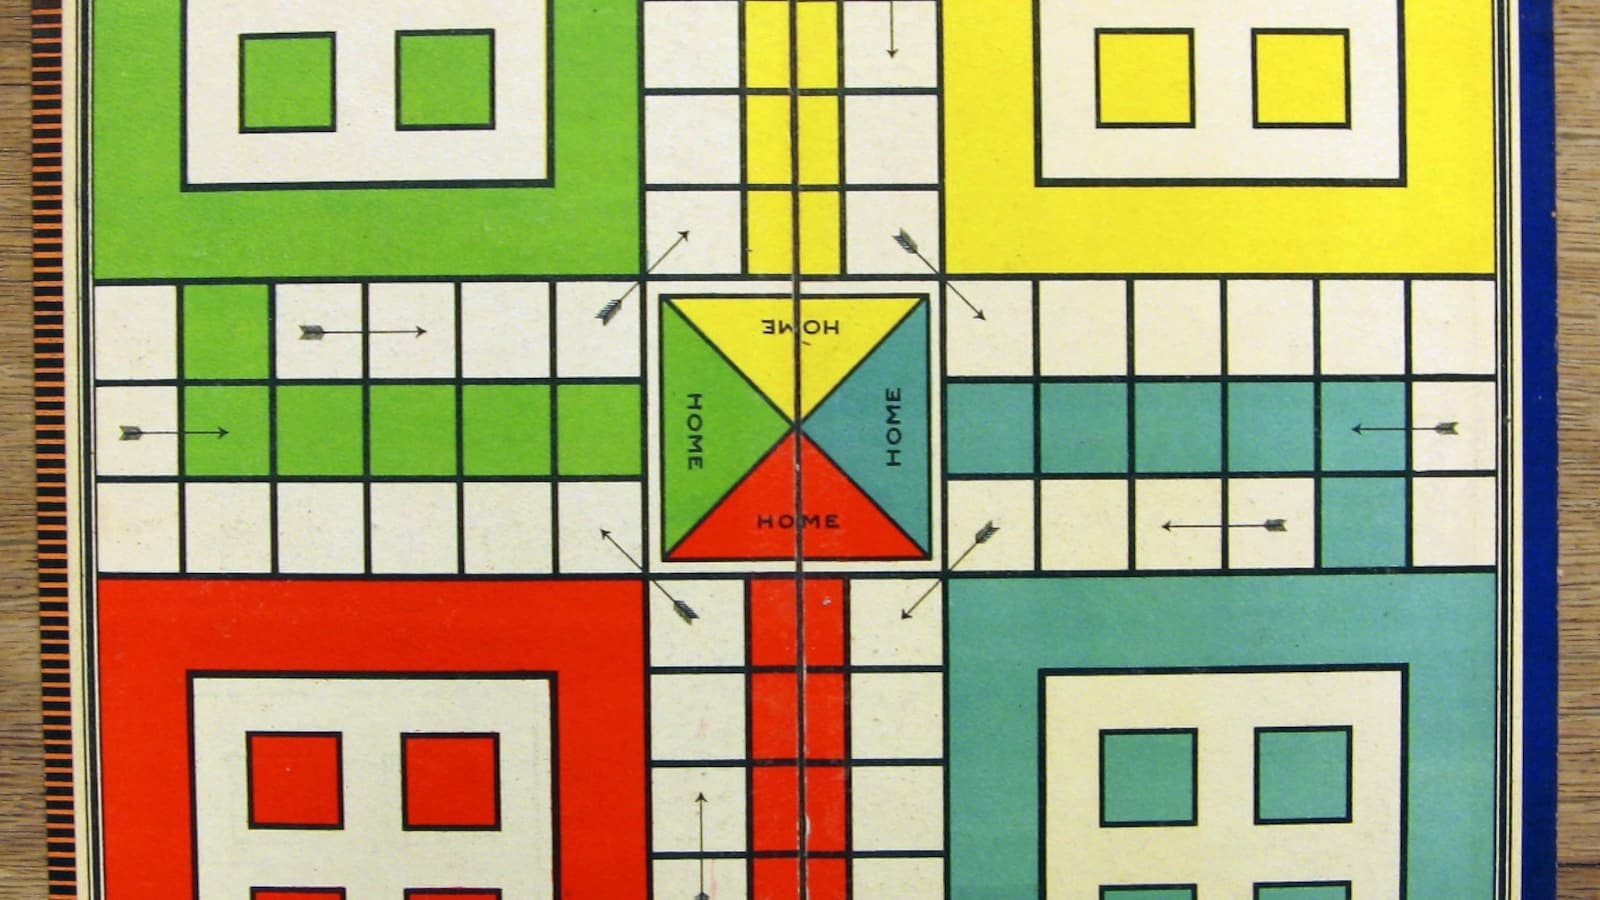 Woman addicted to Ludo bets herself, loses game to landlord: report